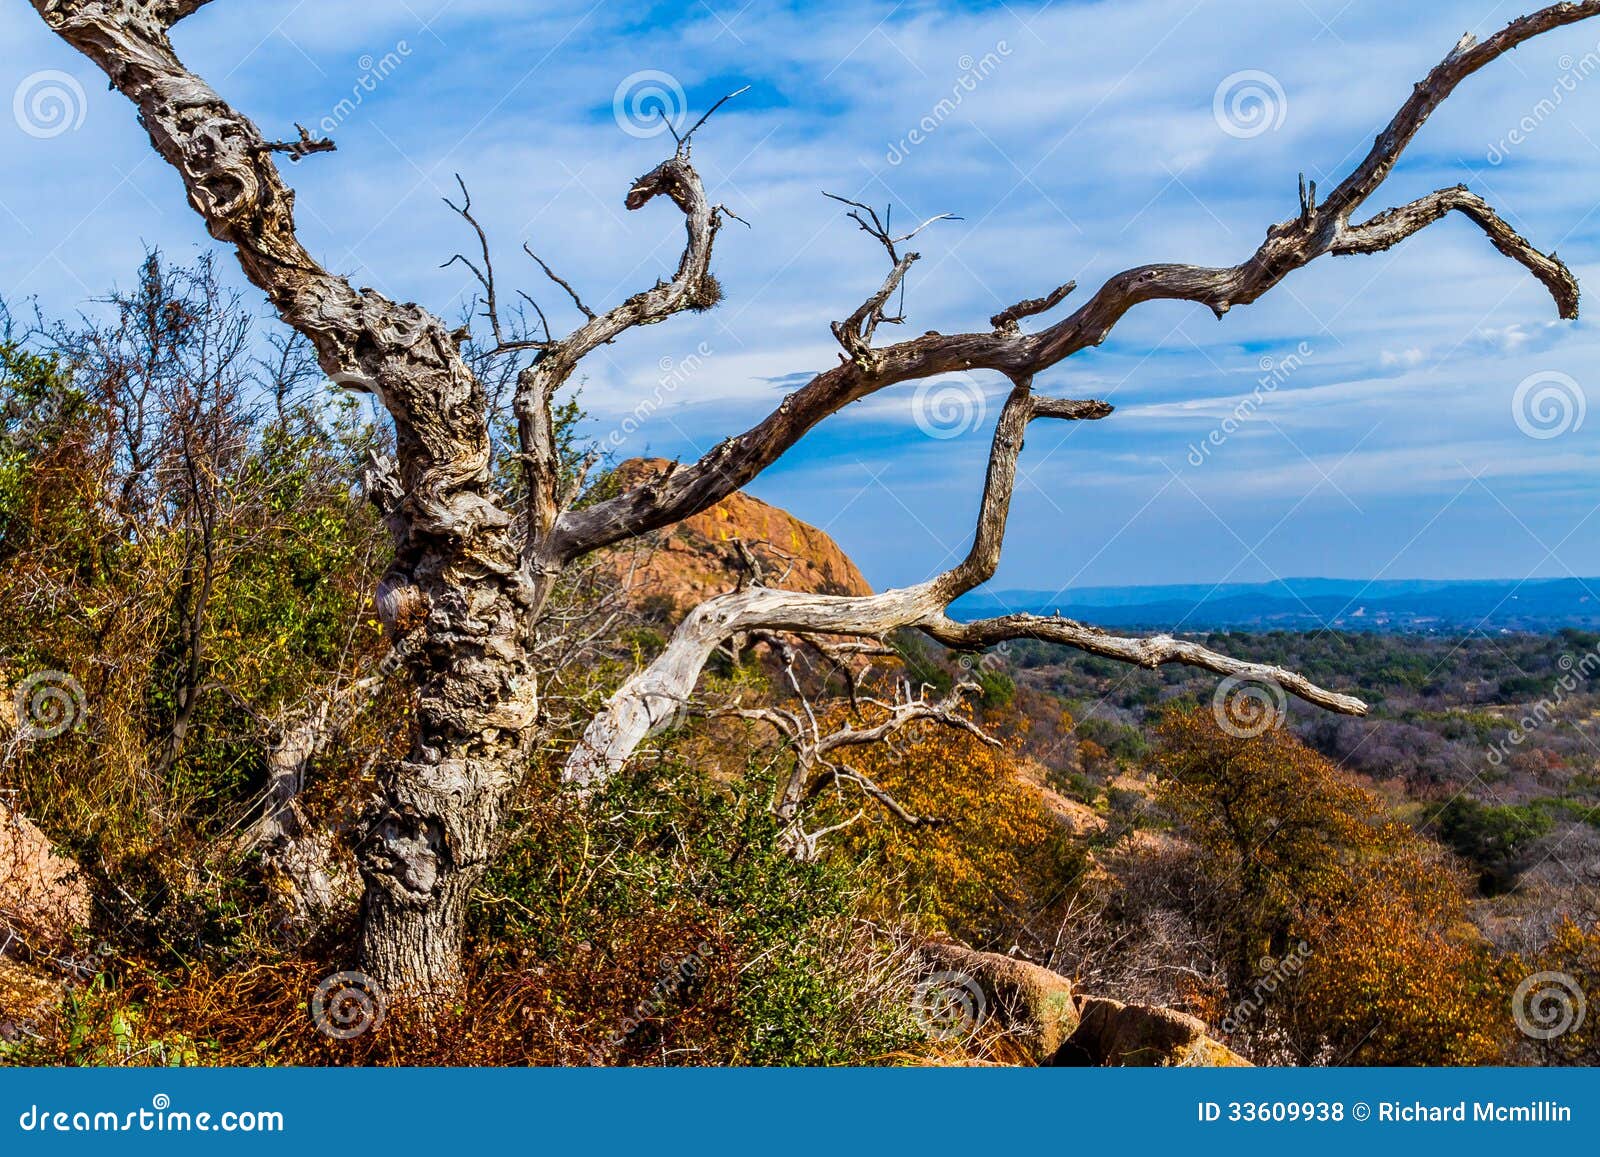 a beautiful wild western view with a gnarly dead tree, a view of turkey peak on enchanted rock, texas.